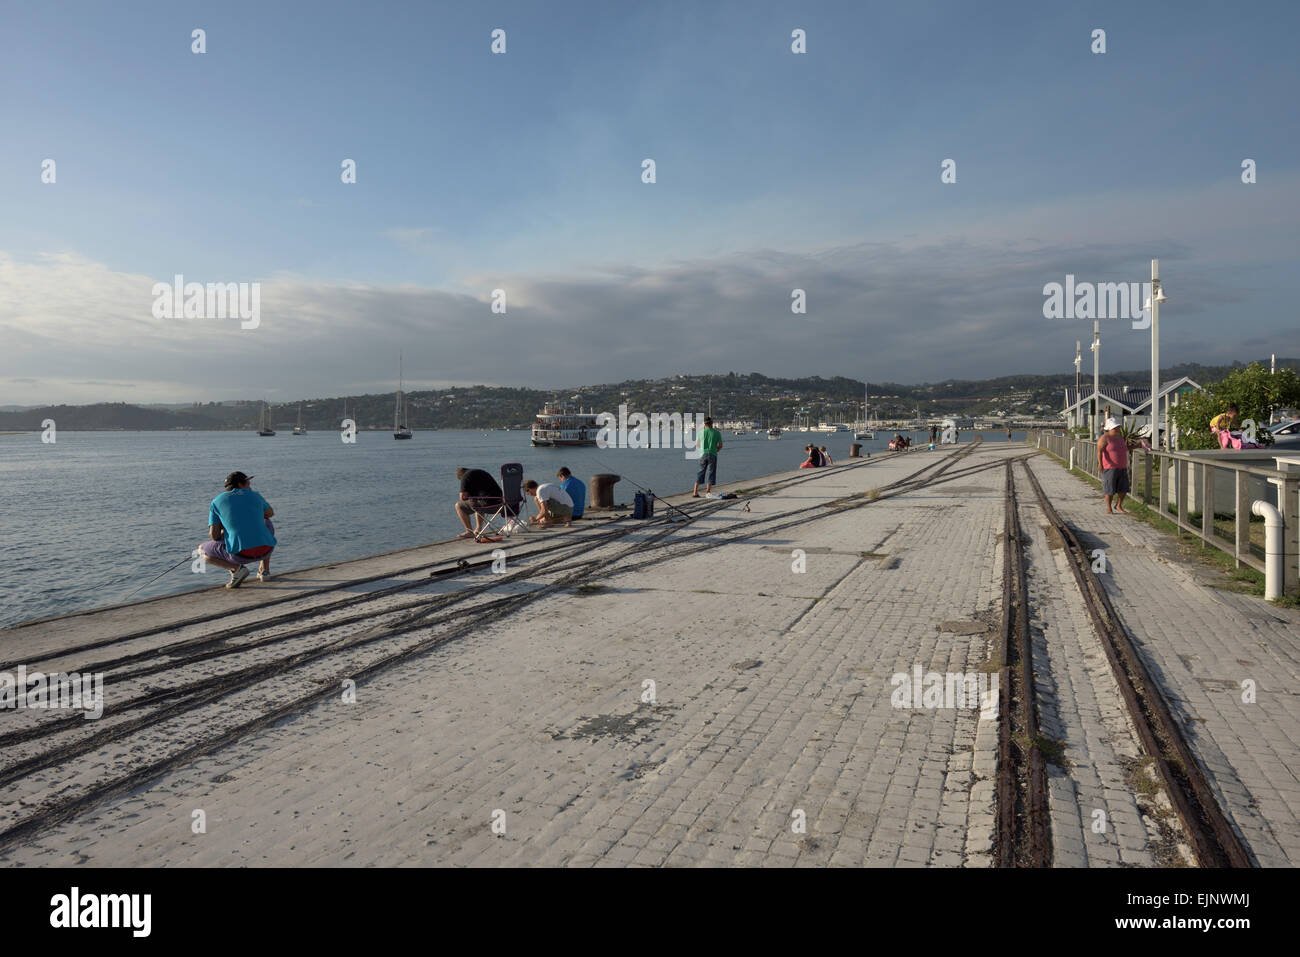 anglers at a pier in the late afternoon sun, Knysna, South Africa Stock Photo